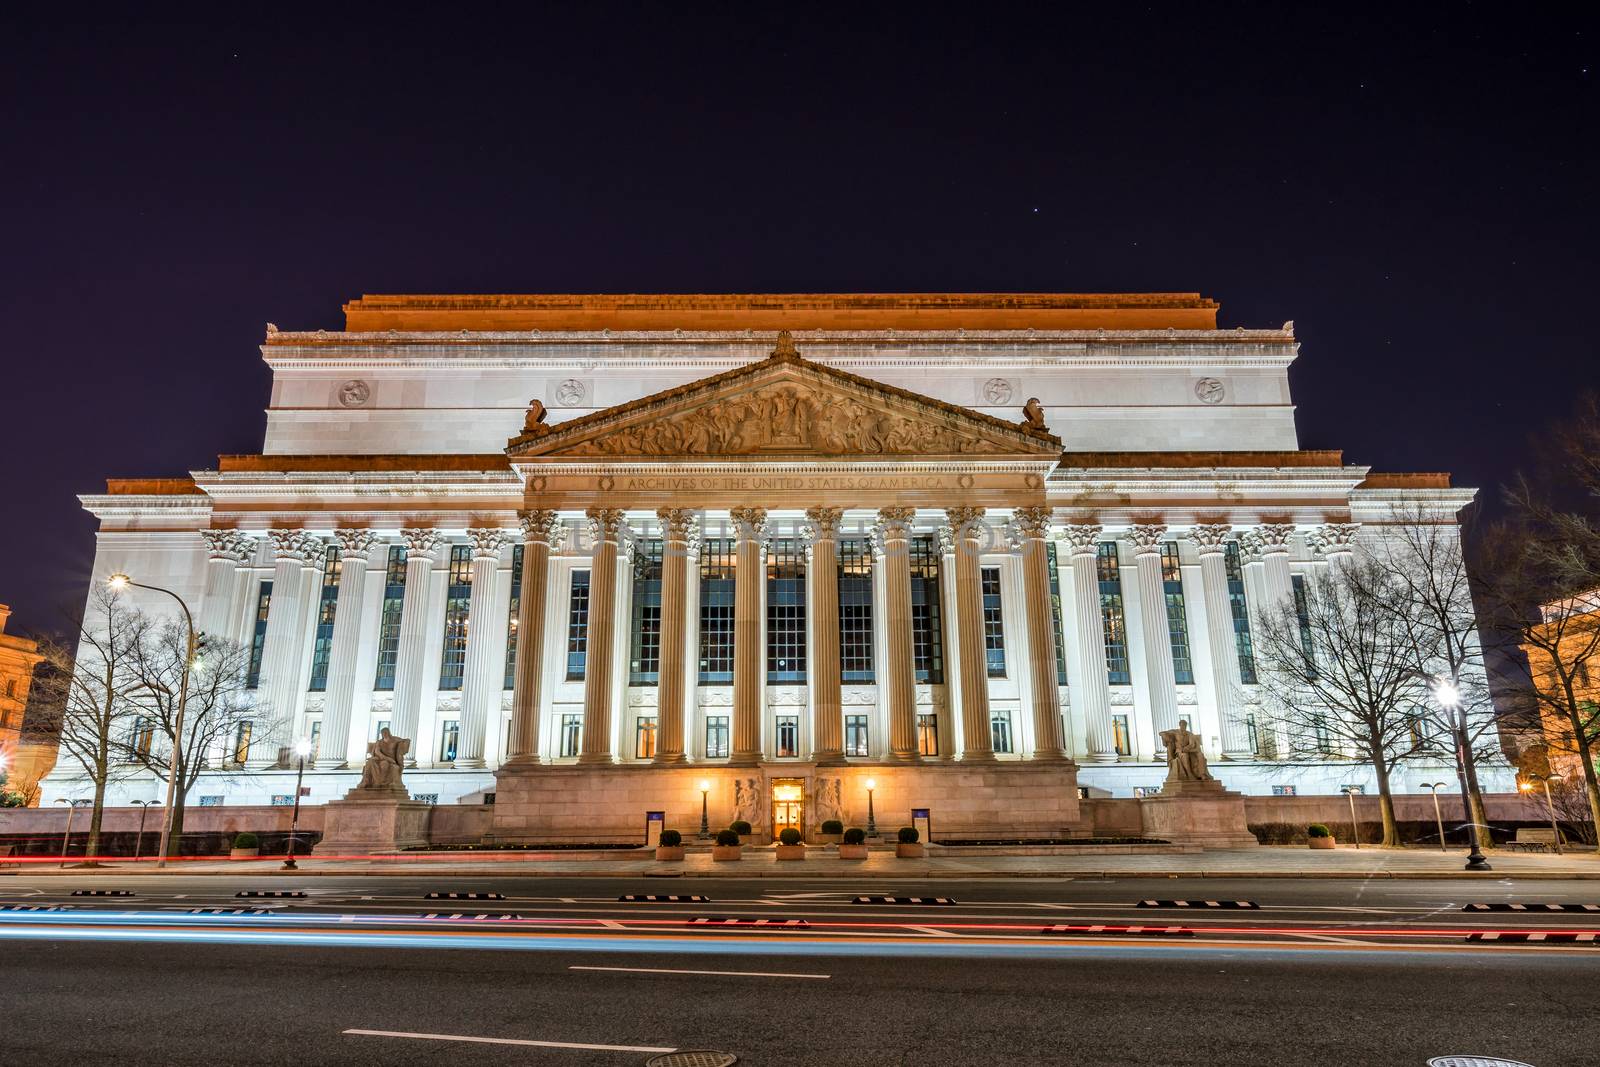 archives of the united states of america at night, washington DC by Tzido